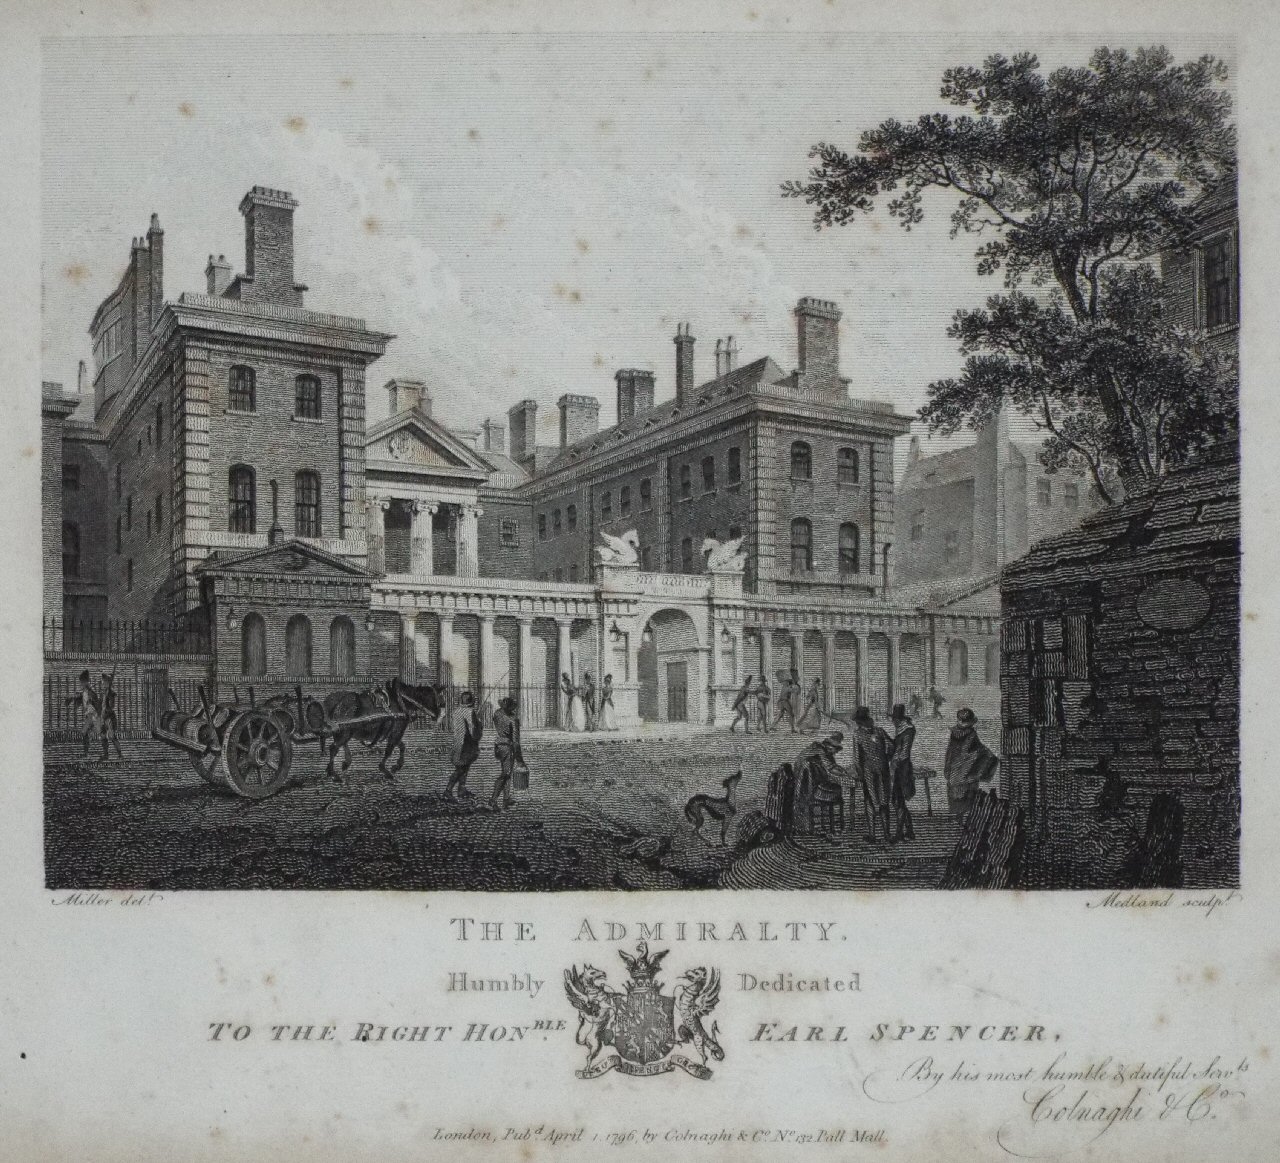 Print - The Admiralty. Humbly Dedicated to the Right Honble. Earl Spencer ... - 